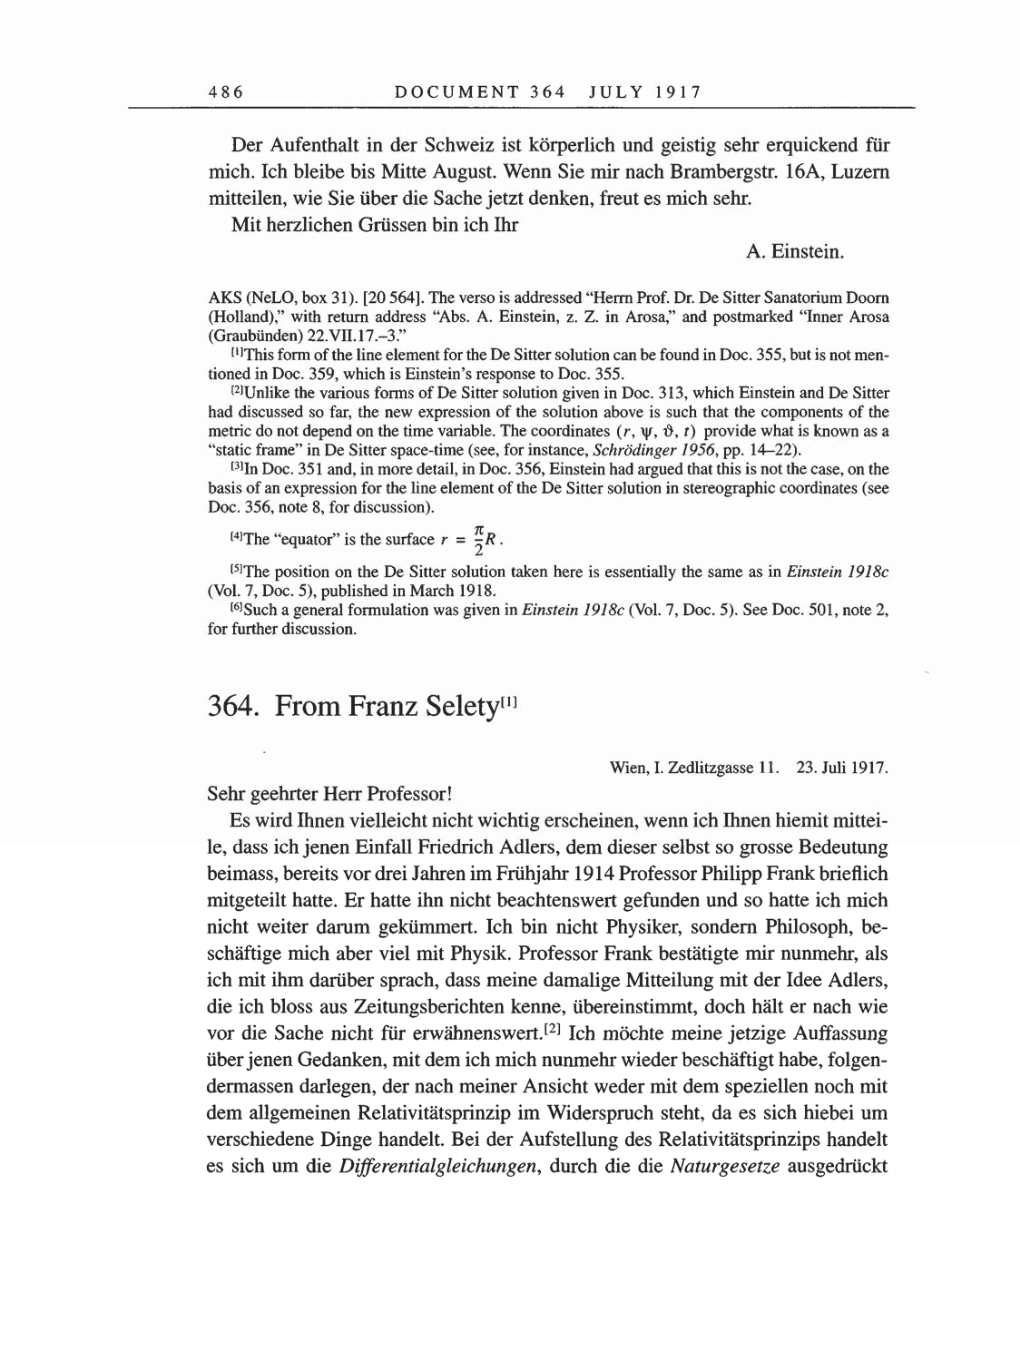 Volume 8, Part A: The Berlin Years: Correspondence 1914-1917 page 486